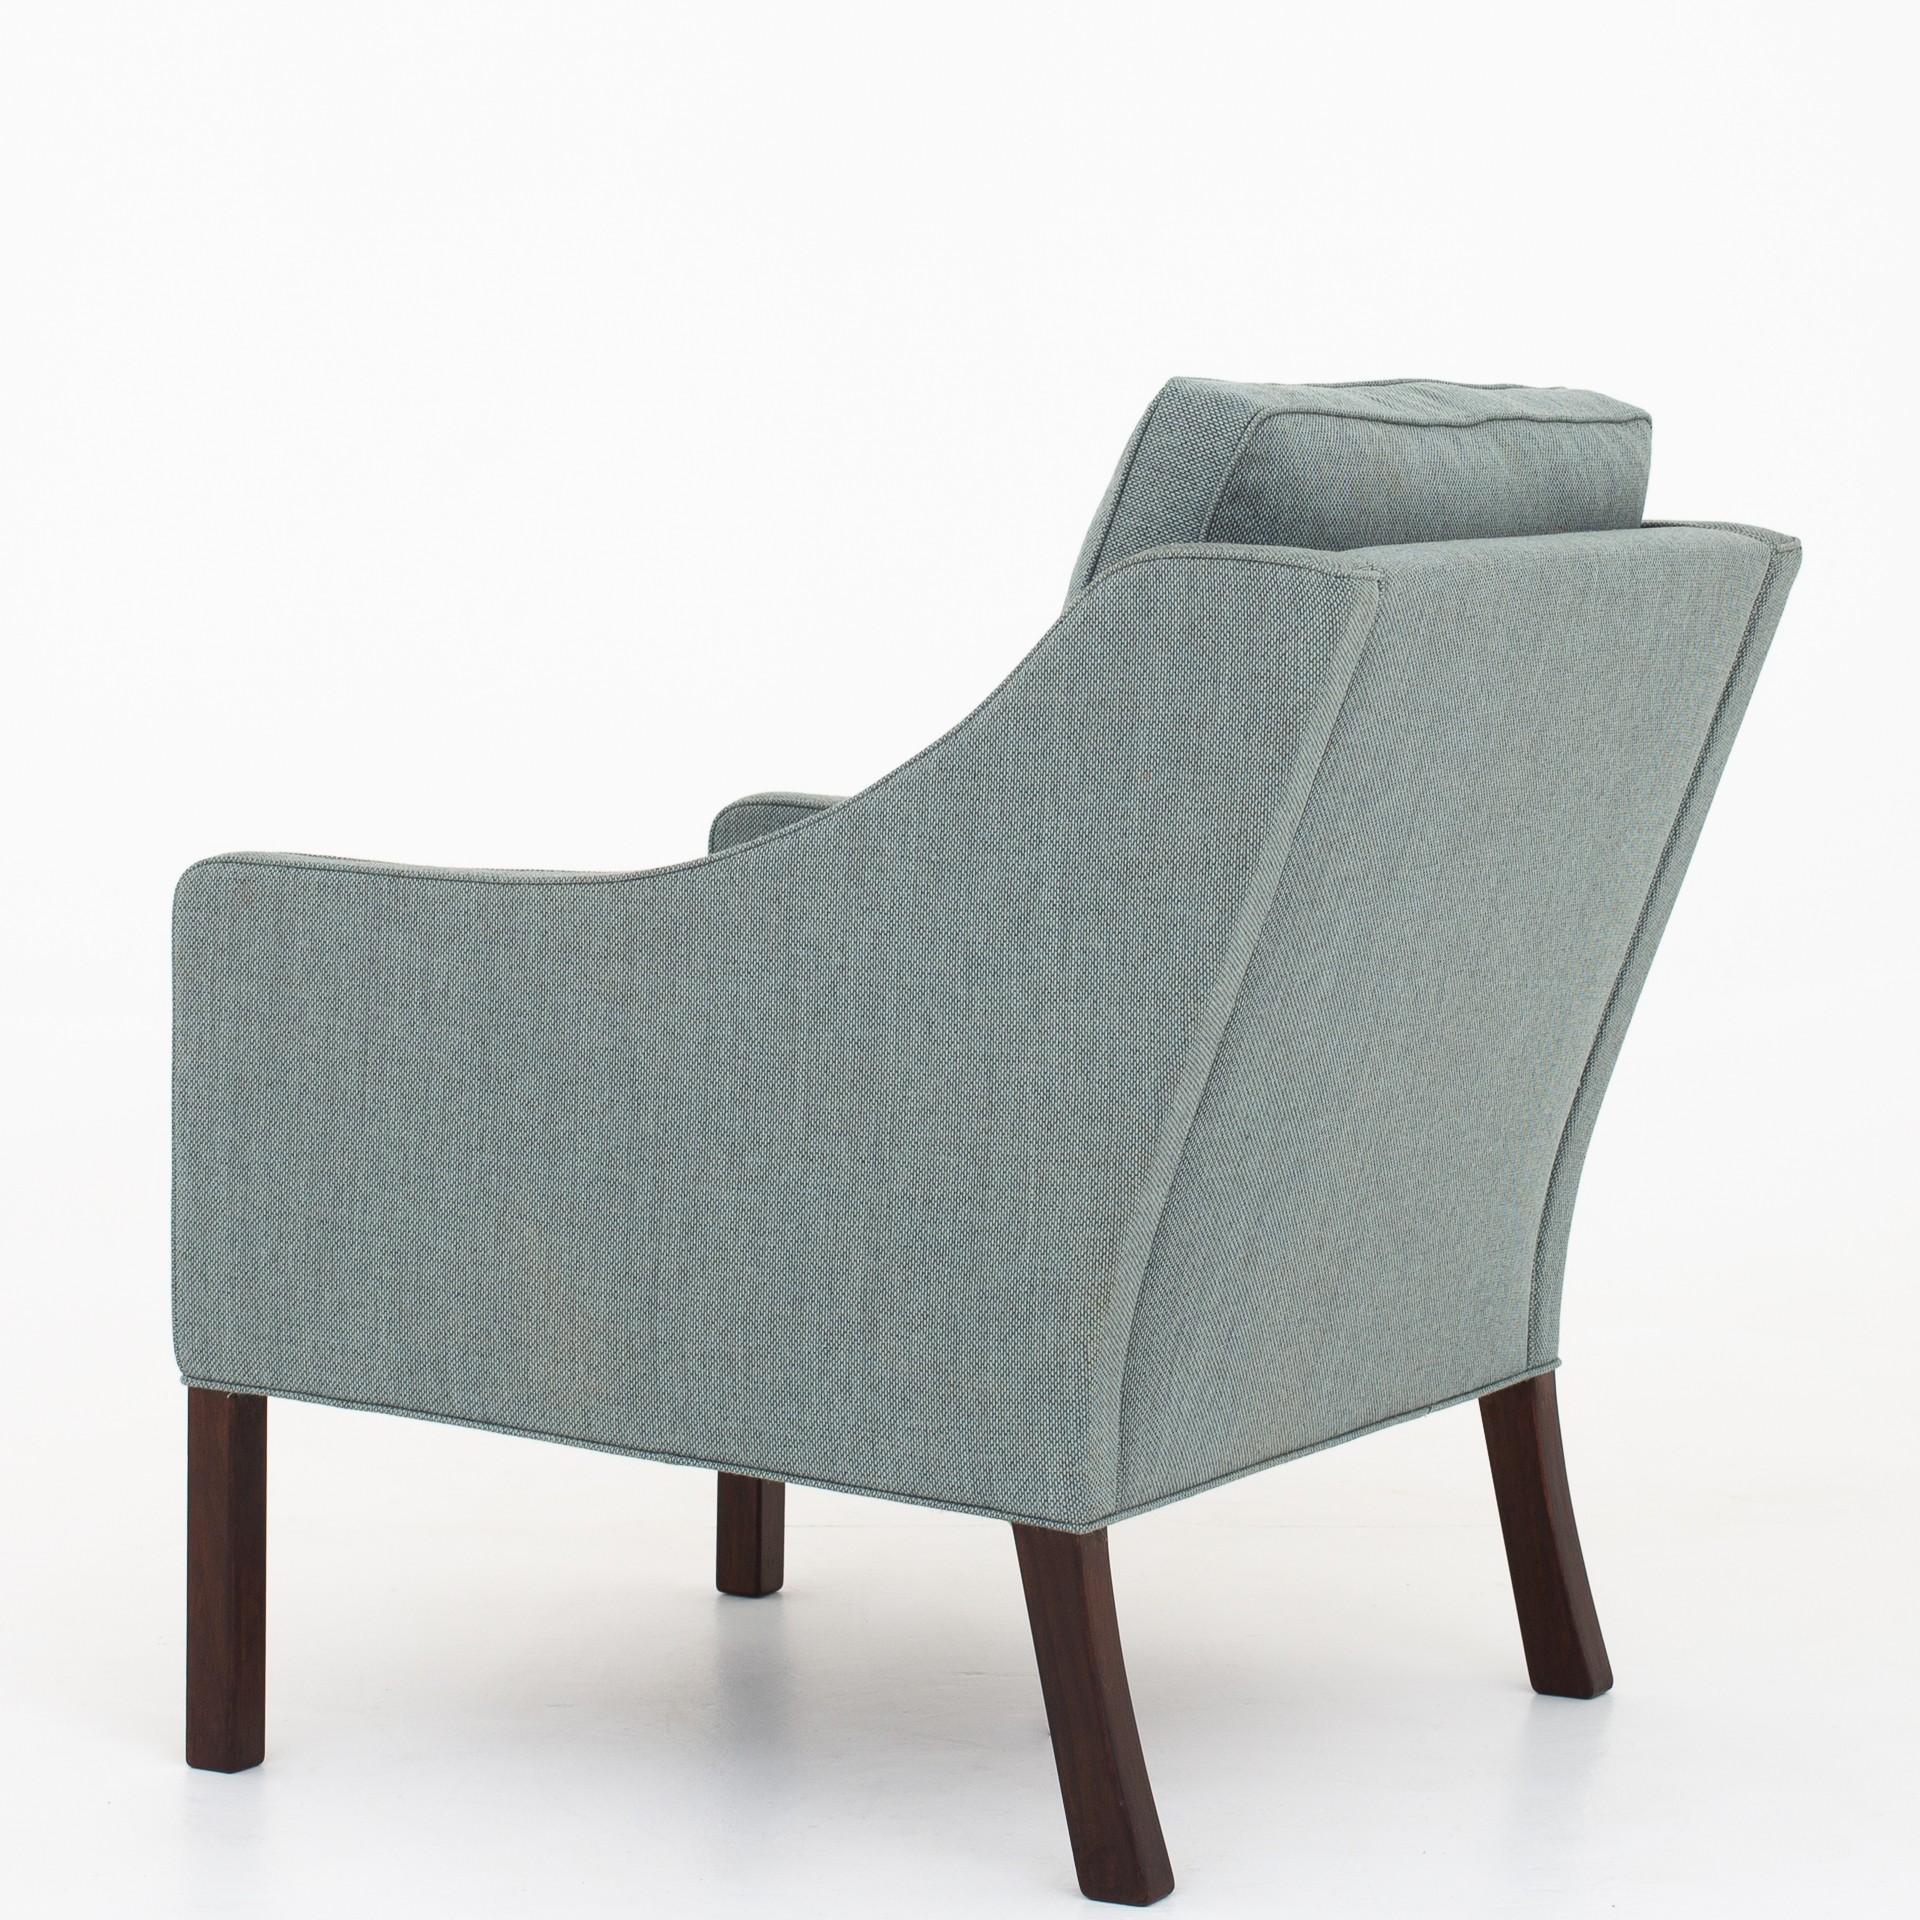 BM 2207 - Easy chair in fabric from Kvadrat (Re-Wool 868) with legs in stained oak. Maker Fredericia Furniture.